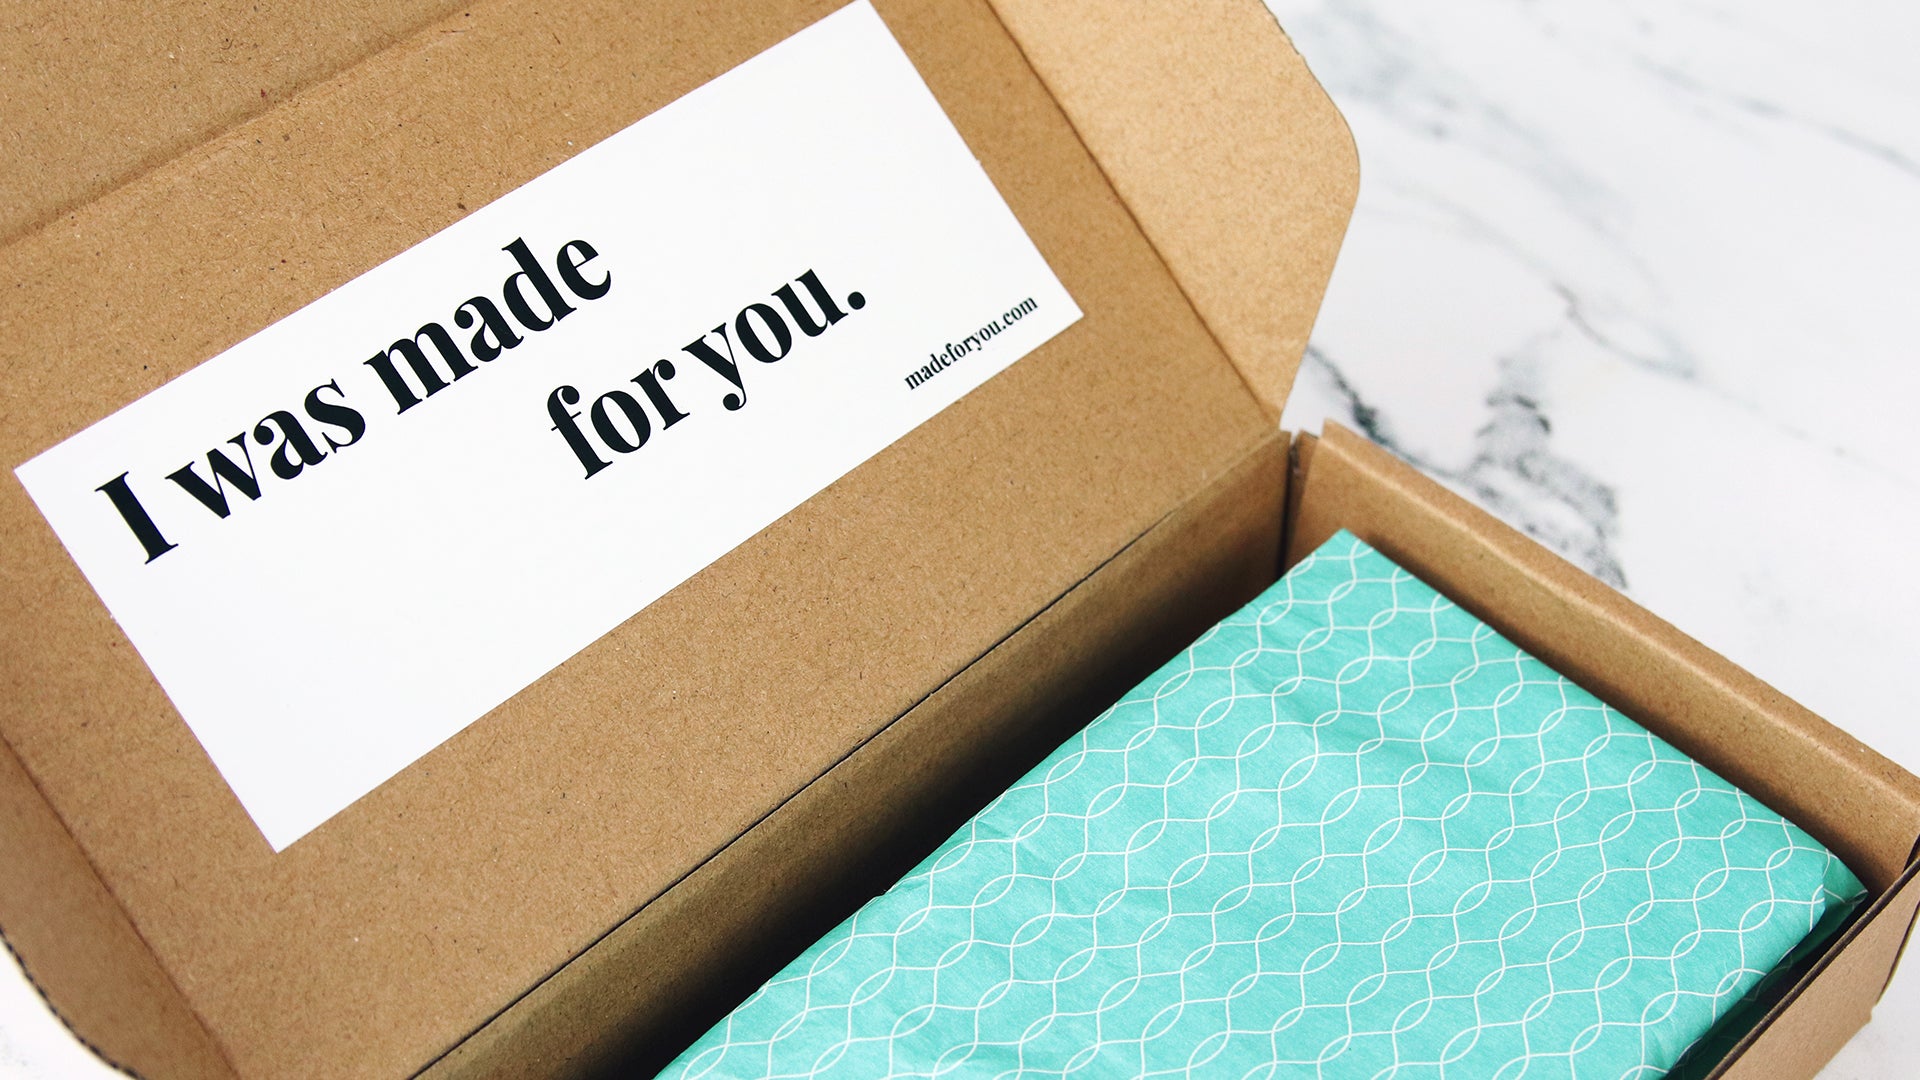 Eco-friendly label with made for you design applied to the inside of an open cardboard box